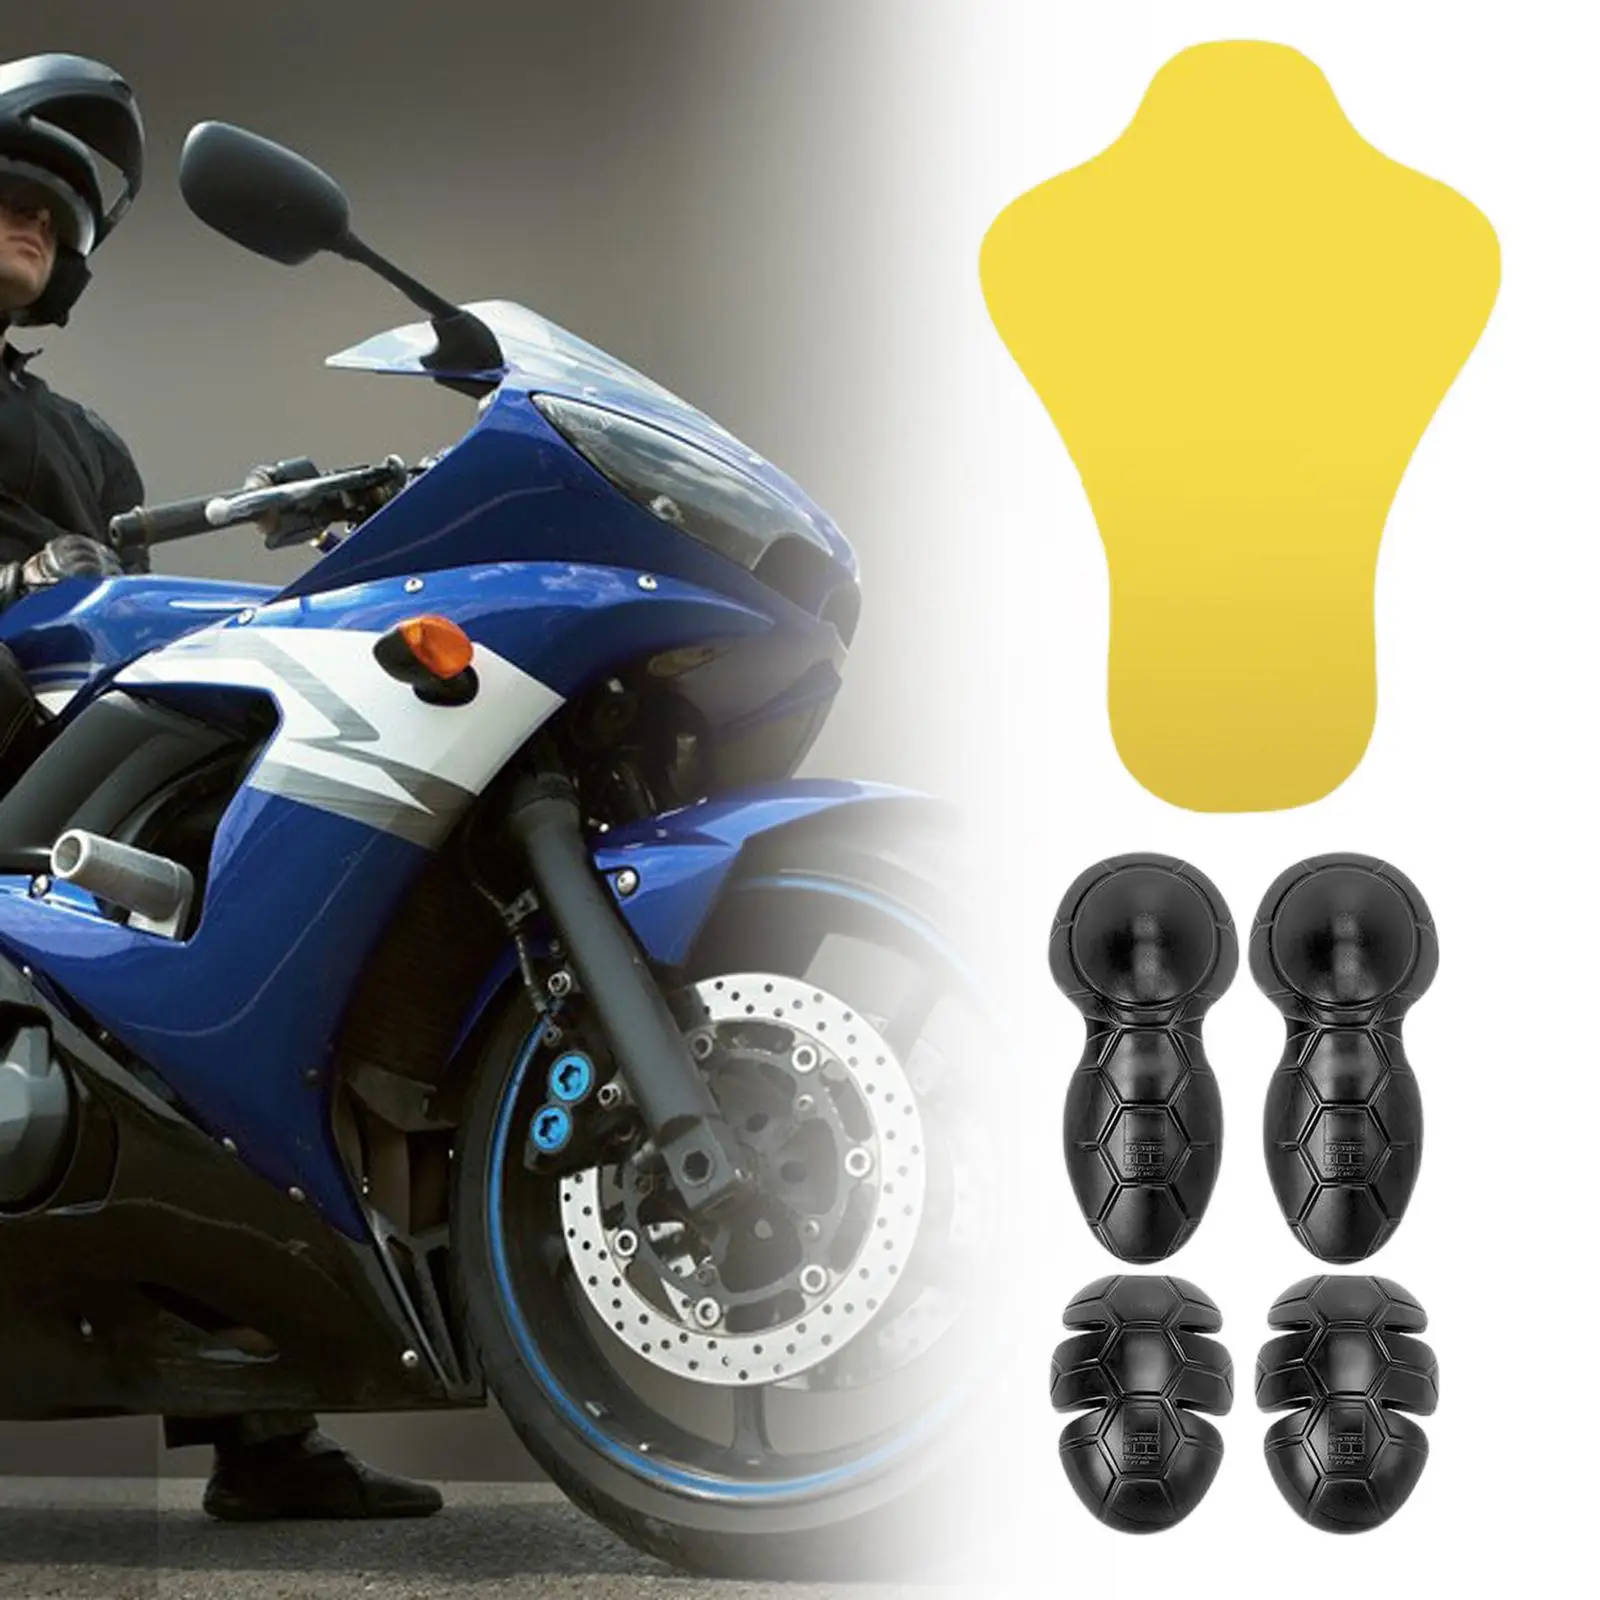 5 Pieces Motorcycle Jacket Insert Armor Protectors Set Back Chest Guard